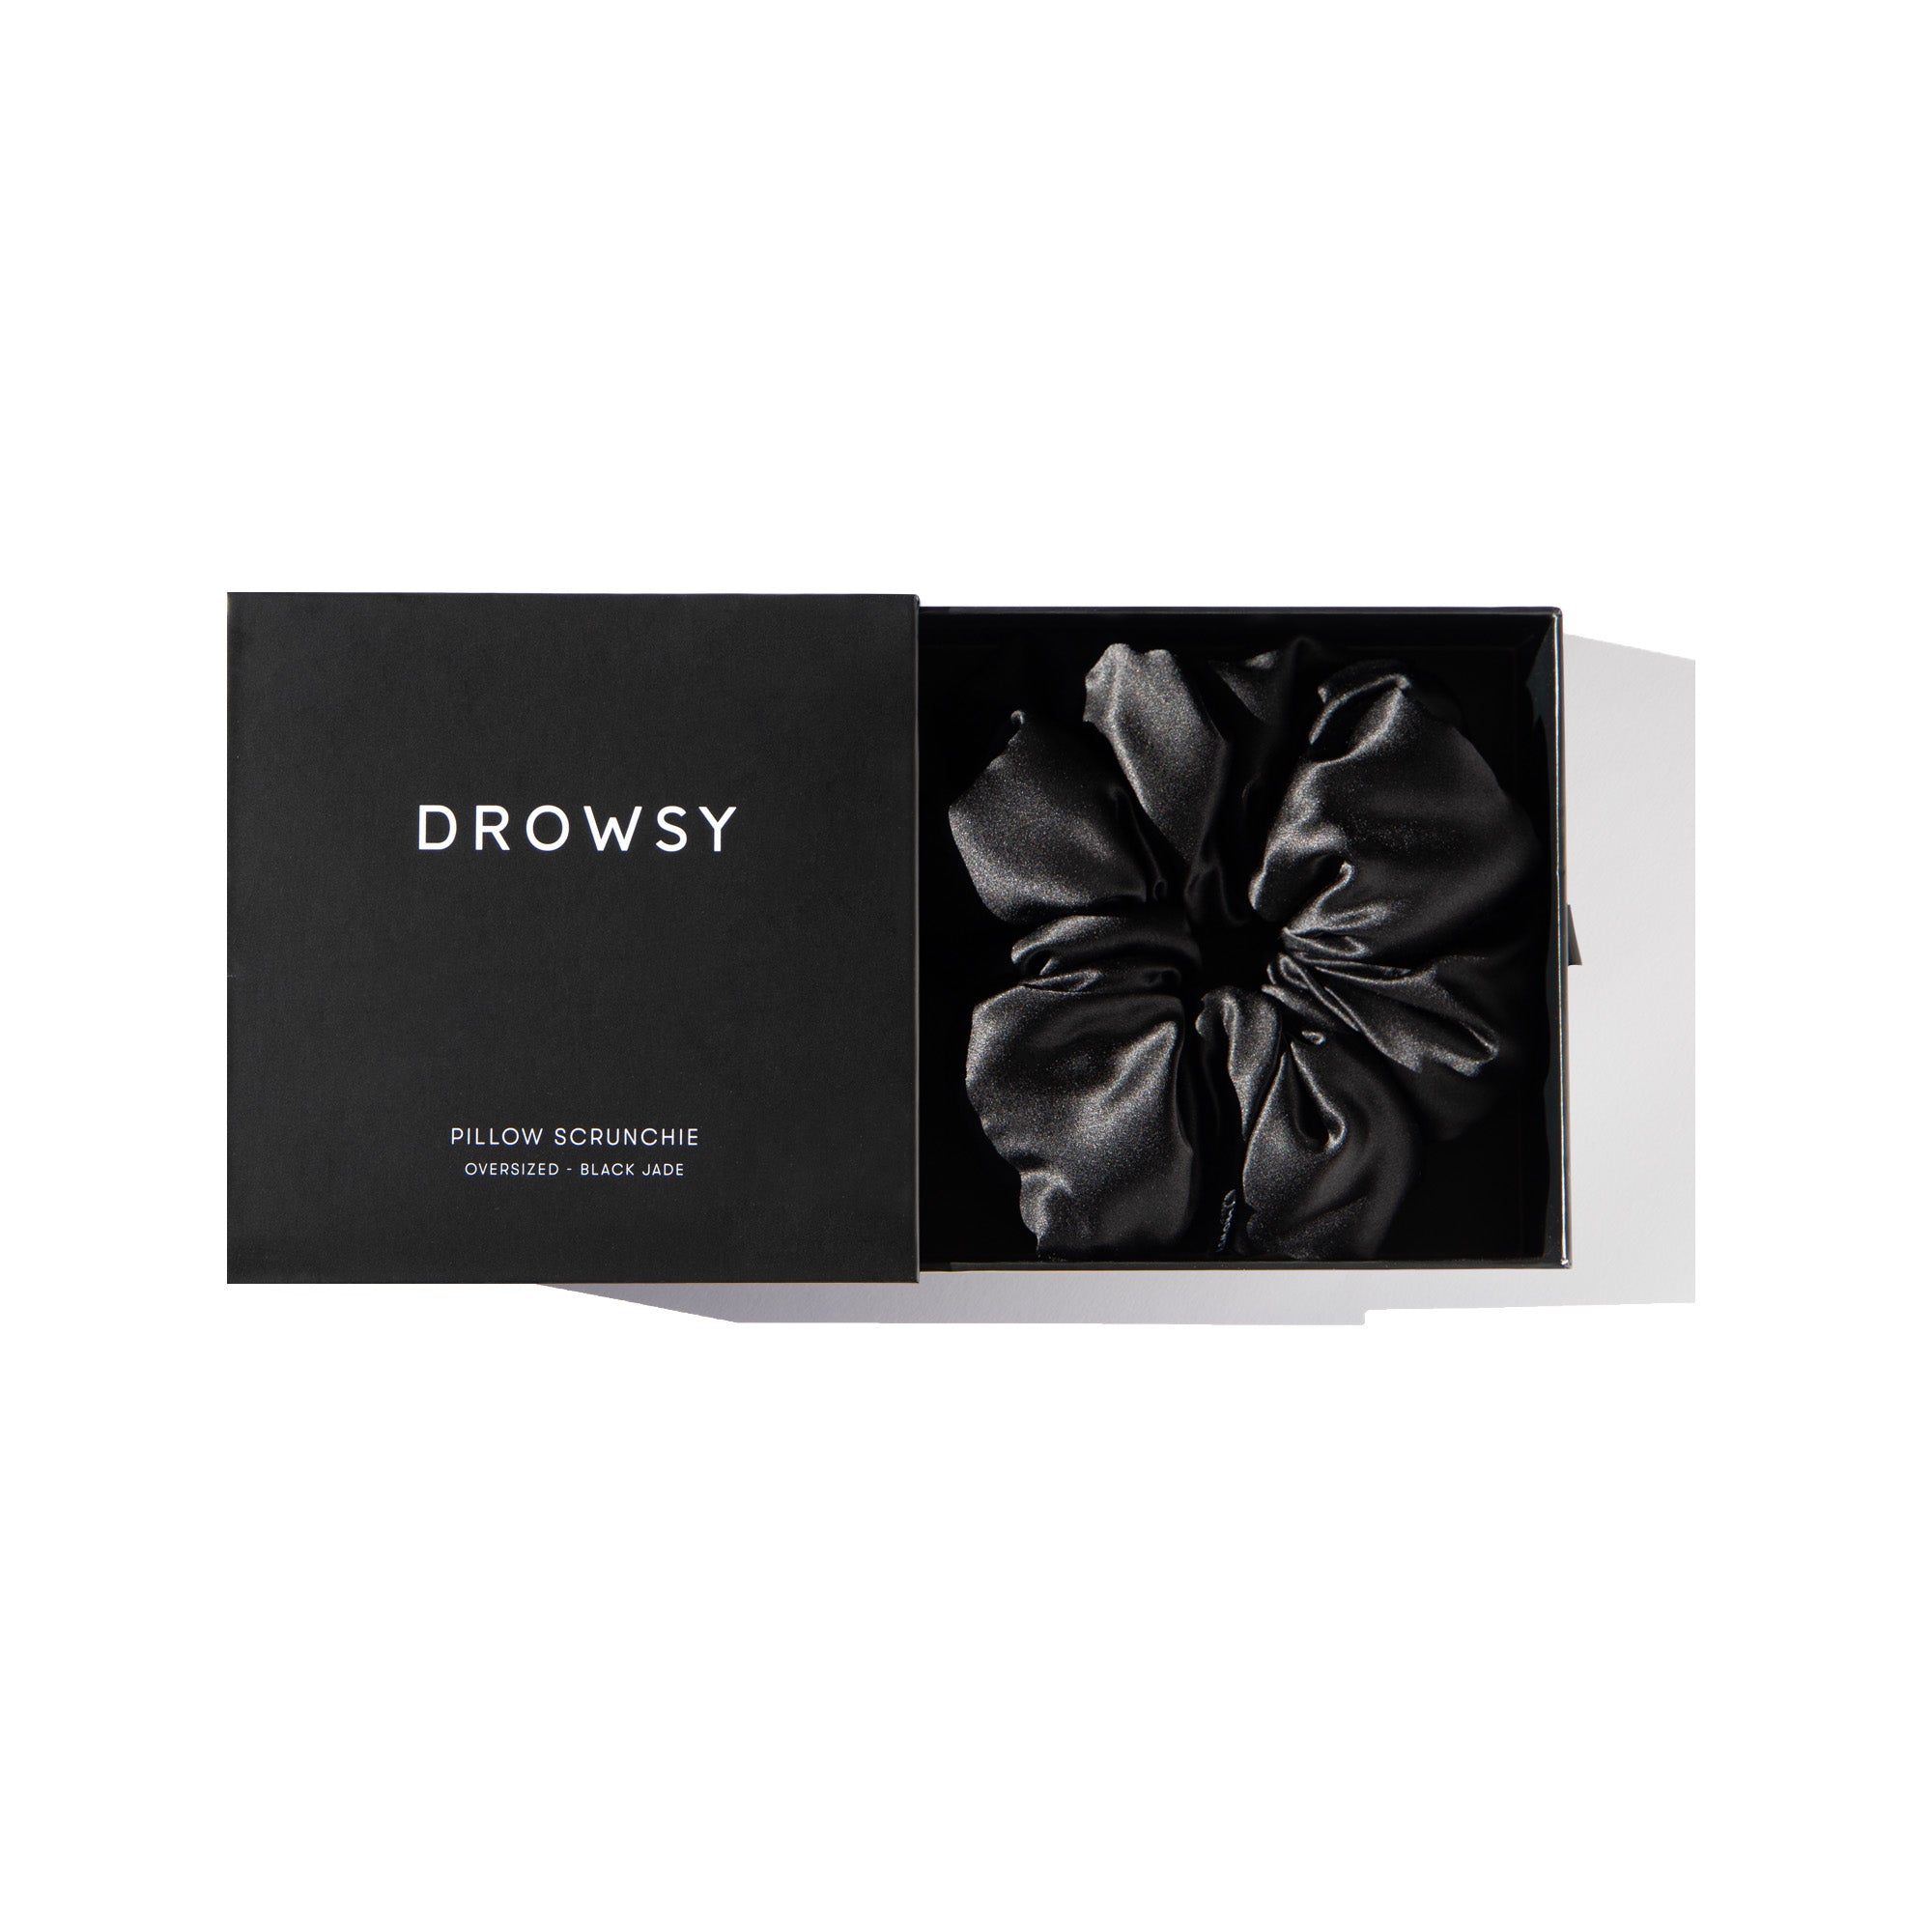 Drowsy Black Jade Pillow Scrunchie in its box on a white background